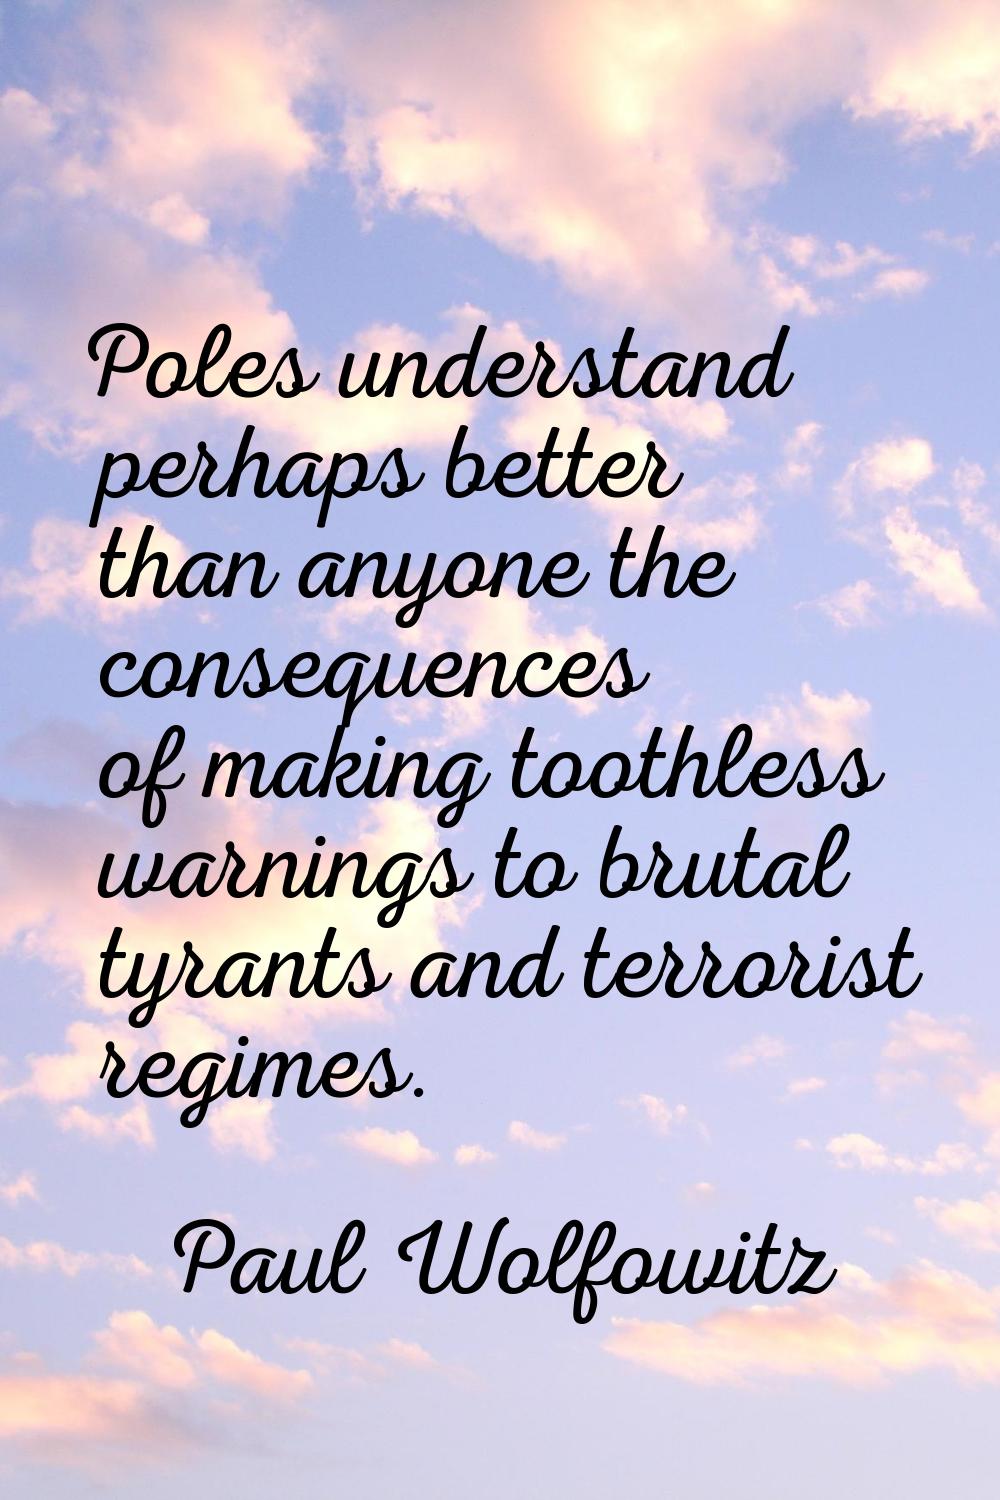 Poles understand perhaps better than anyone the consequences of making toothless warnings to brutal